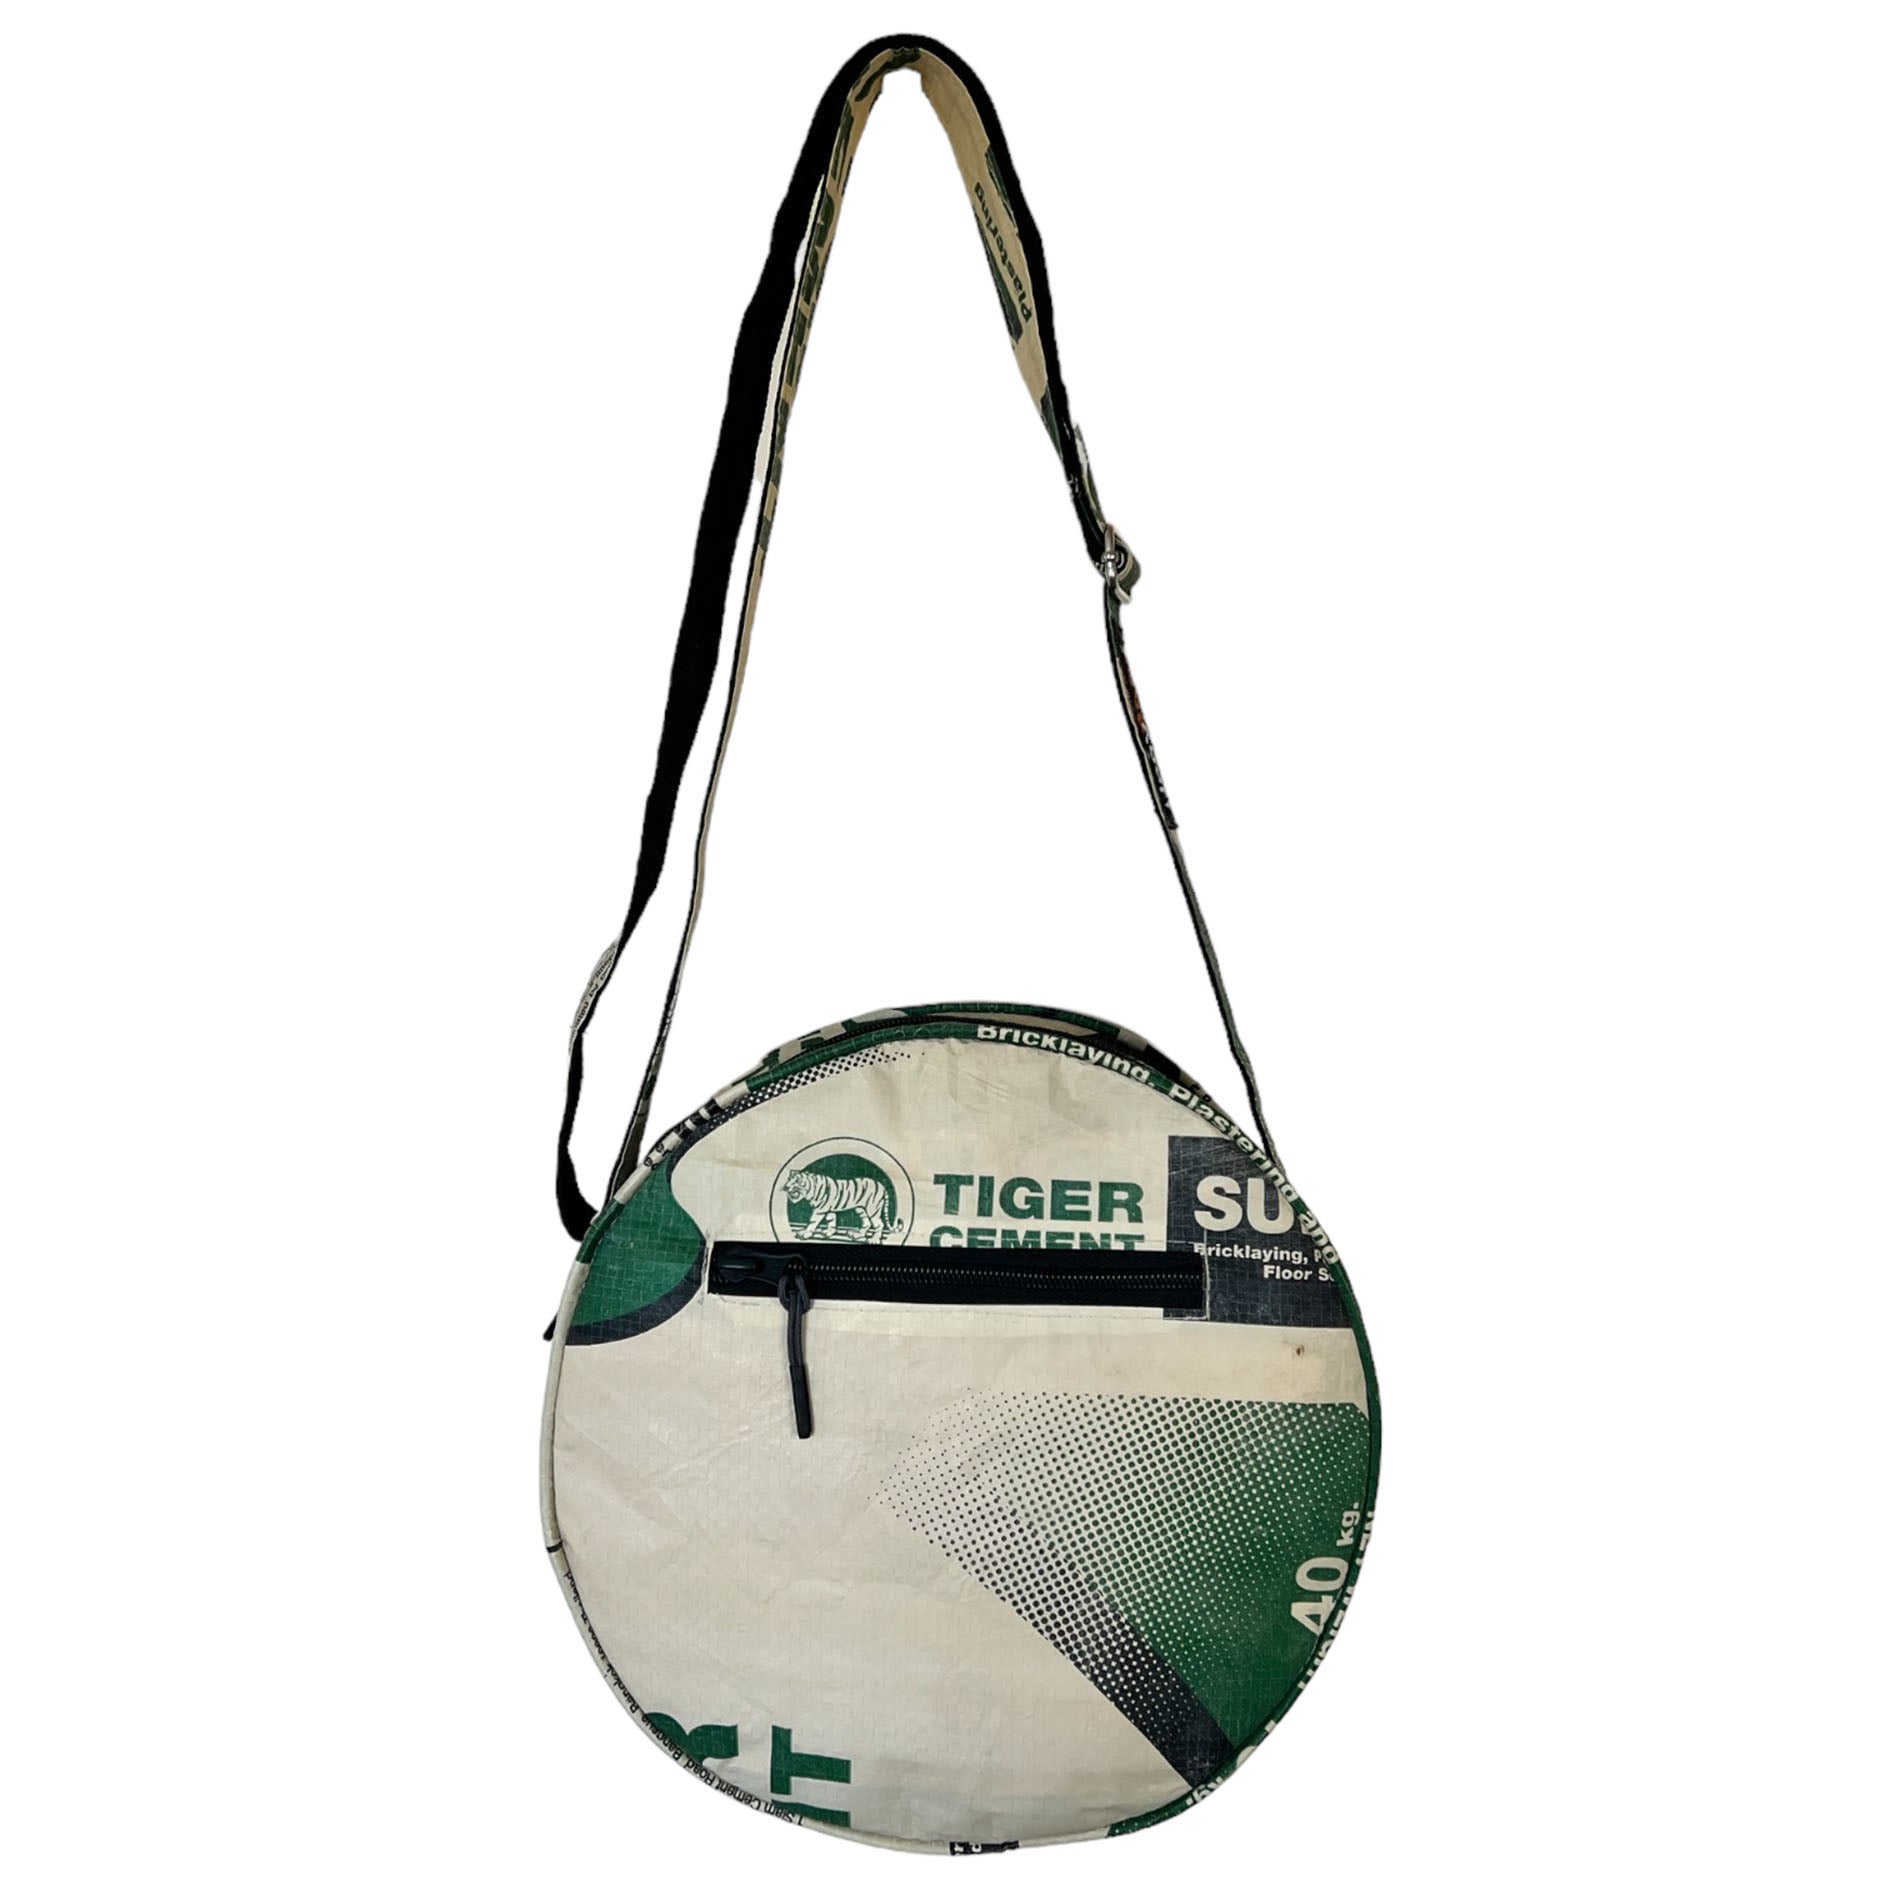 Recycled material round bags with animal prints . Ethical bags.  Edit alt text